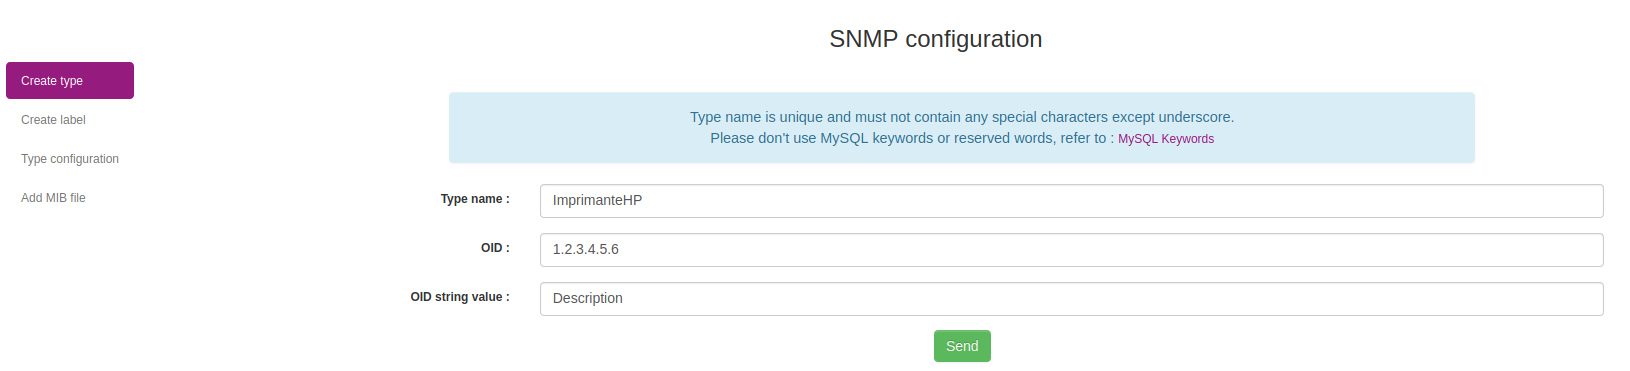 SNMP feature type